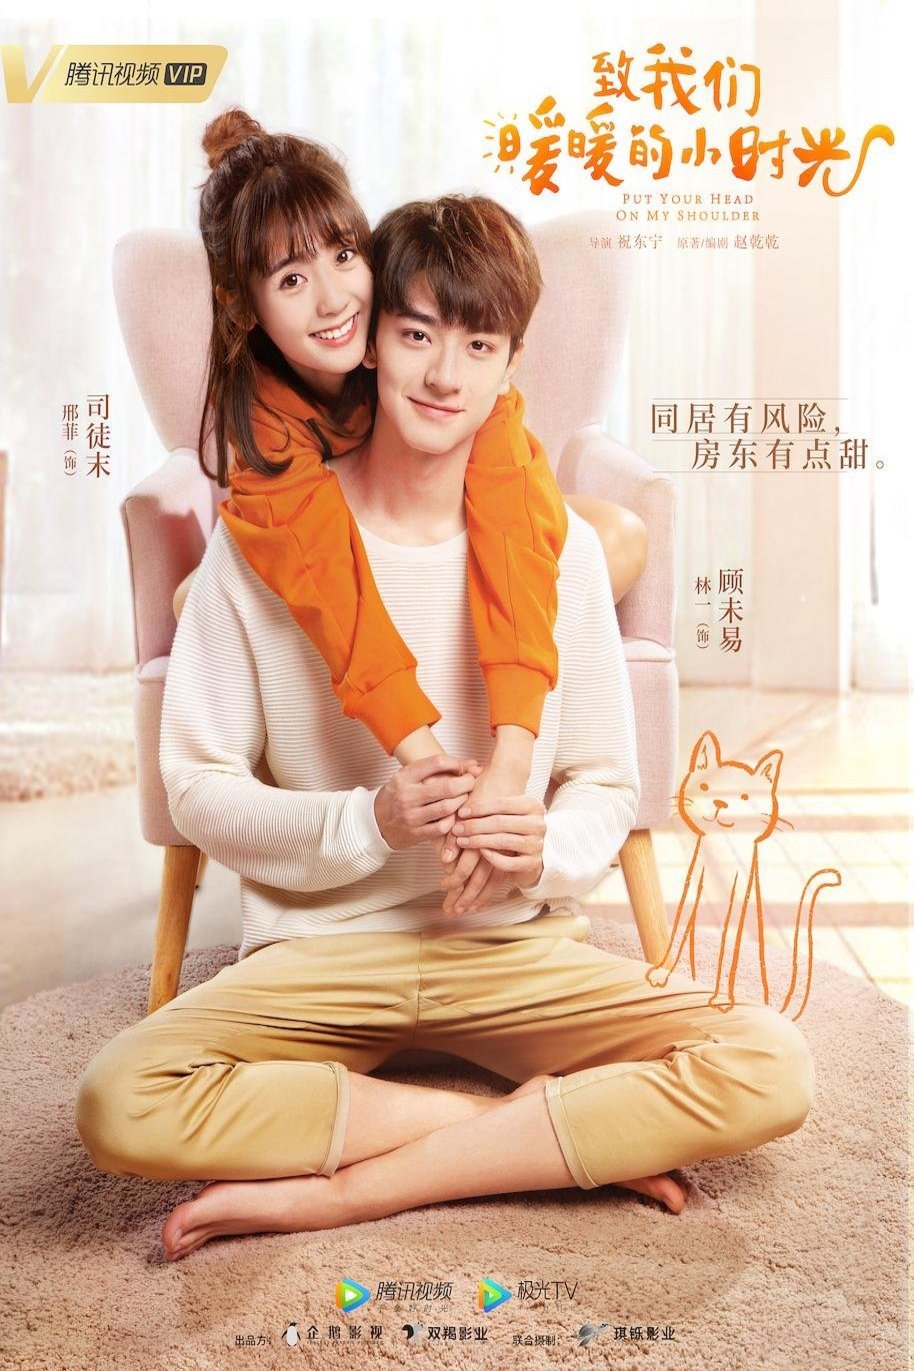 Mandarin poster of the movie Put Your Head on My Shoulder